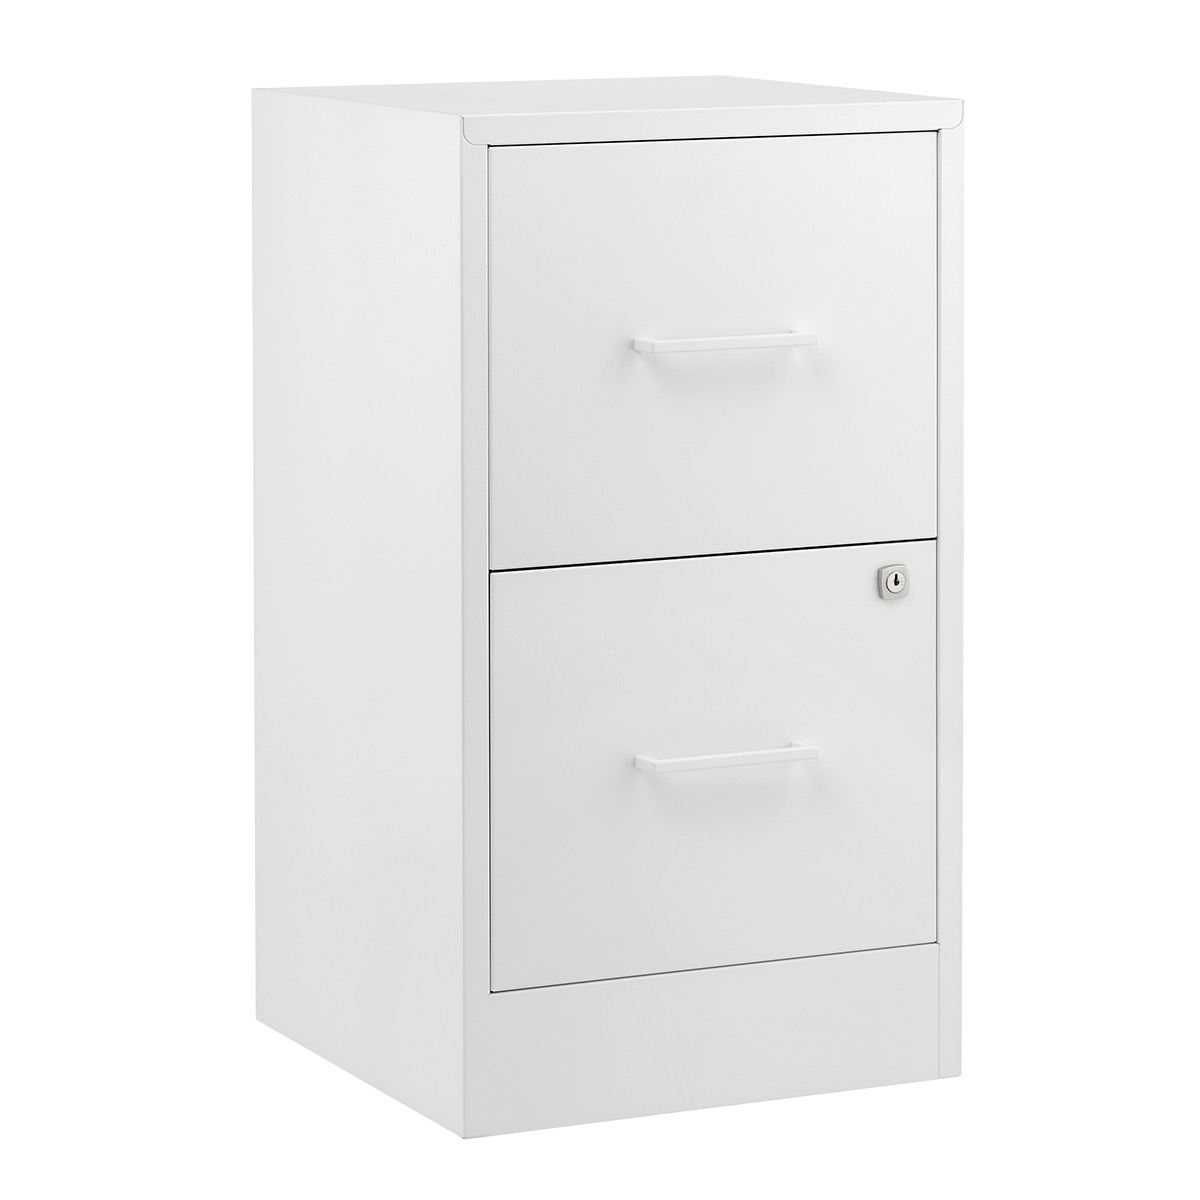 https://www.containerstore.com/catalogimages/442275/10088699_file_cabinet_2-door_white.jpg